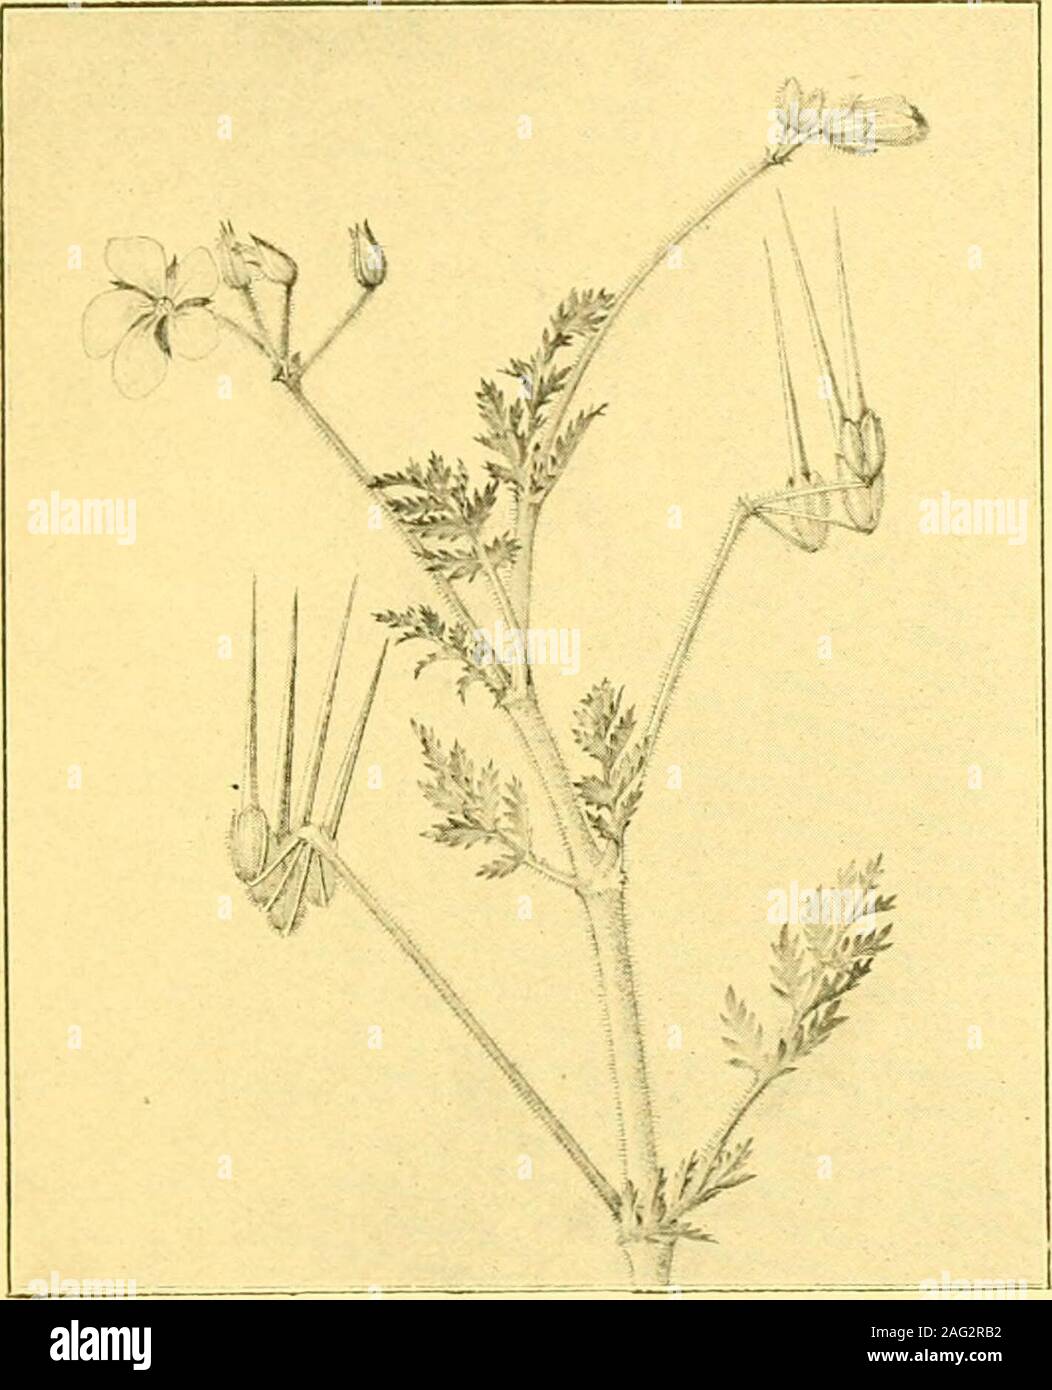 . Field and woodland plants. The fruit op tiikStorks-bill. WASTES AND WAYSIDES IN SUMMER 161 flowers, one of which—the Haiiy Tare ( Vicia hirsulu)—is verycommon in fields and hedges, tiowering from June to August. Thestems of this plant are slender, hauy, and are so much branchedthat they form tangled masses, often mixed up in a confusedmanner ith neighbouring plants. The leaves have from six to. THE Hemlock Storks-bill. eight paii-s of leaflets ; and tlie minute, pale blue flowers, in clustersof from one to six, are on long peduncles. The pods have only twoseeds, and are hairy and sessile. Stock Photo